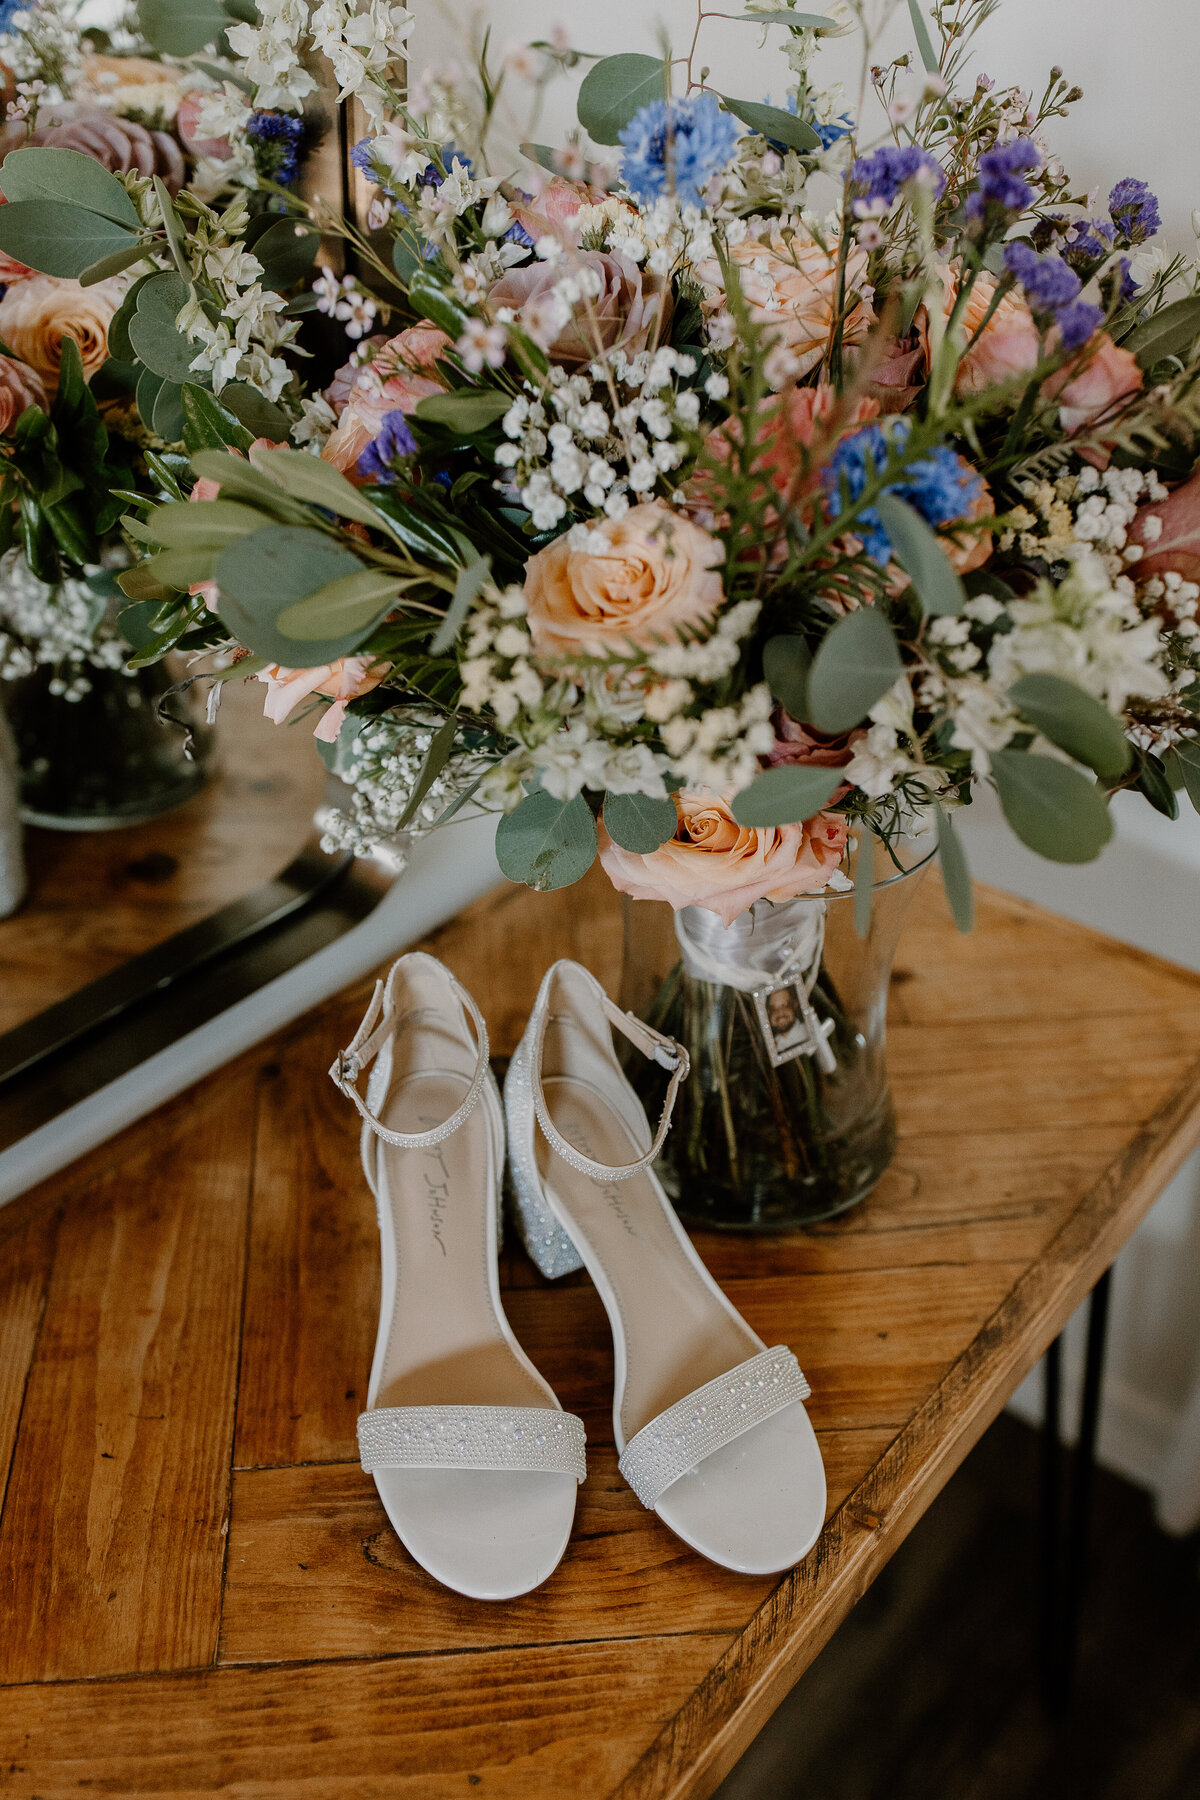 white heels sitting on a table next to a bouquet of flowers.